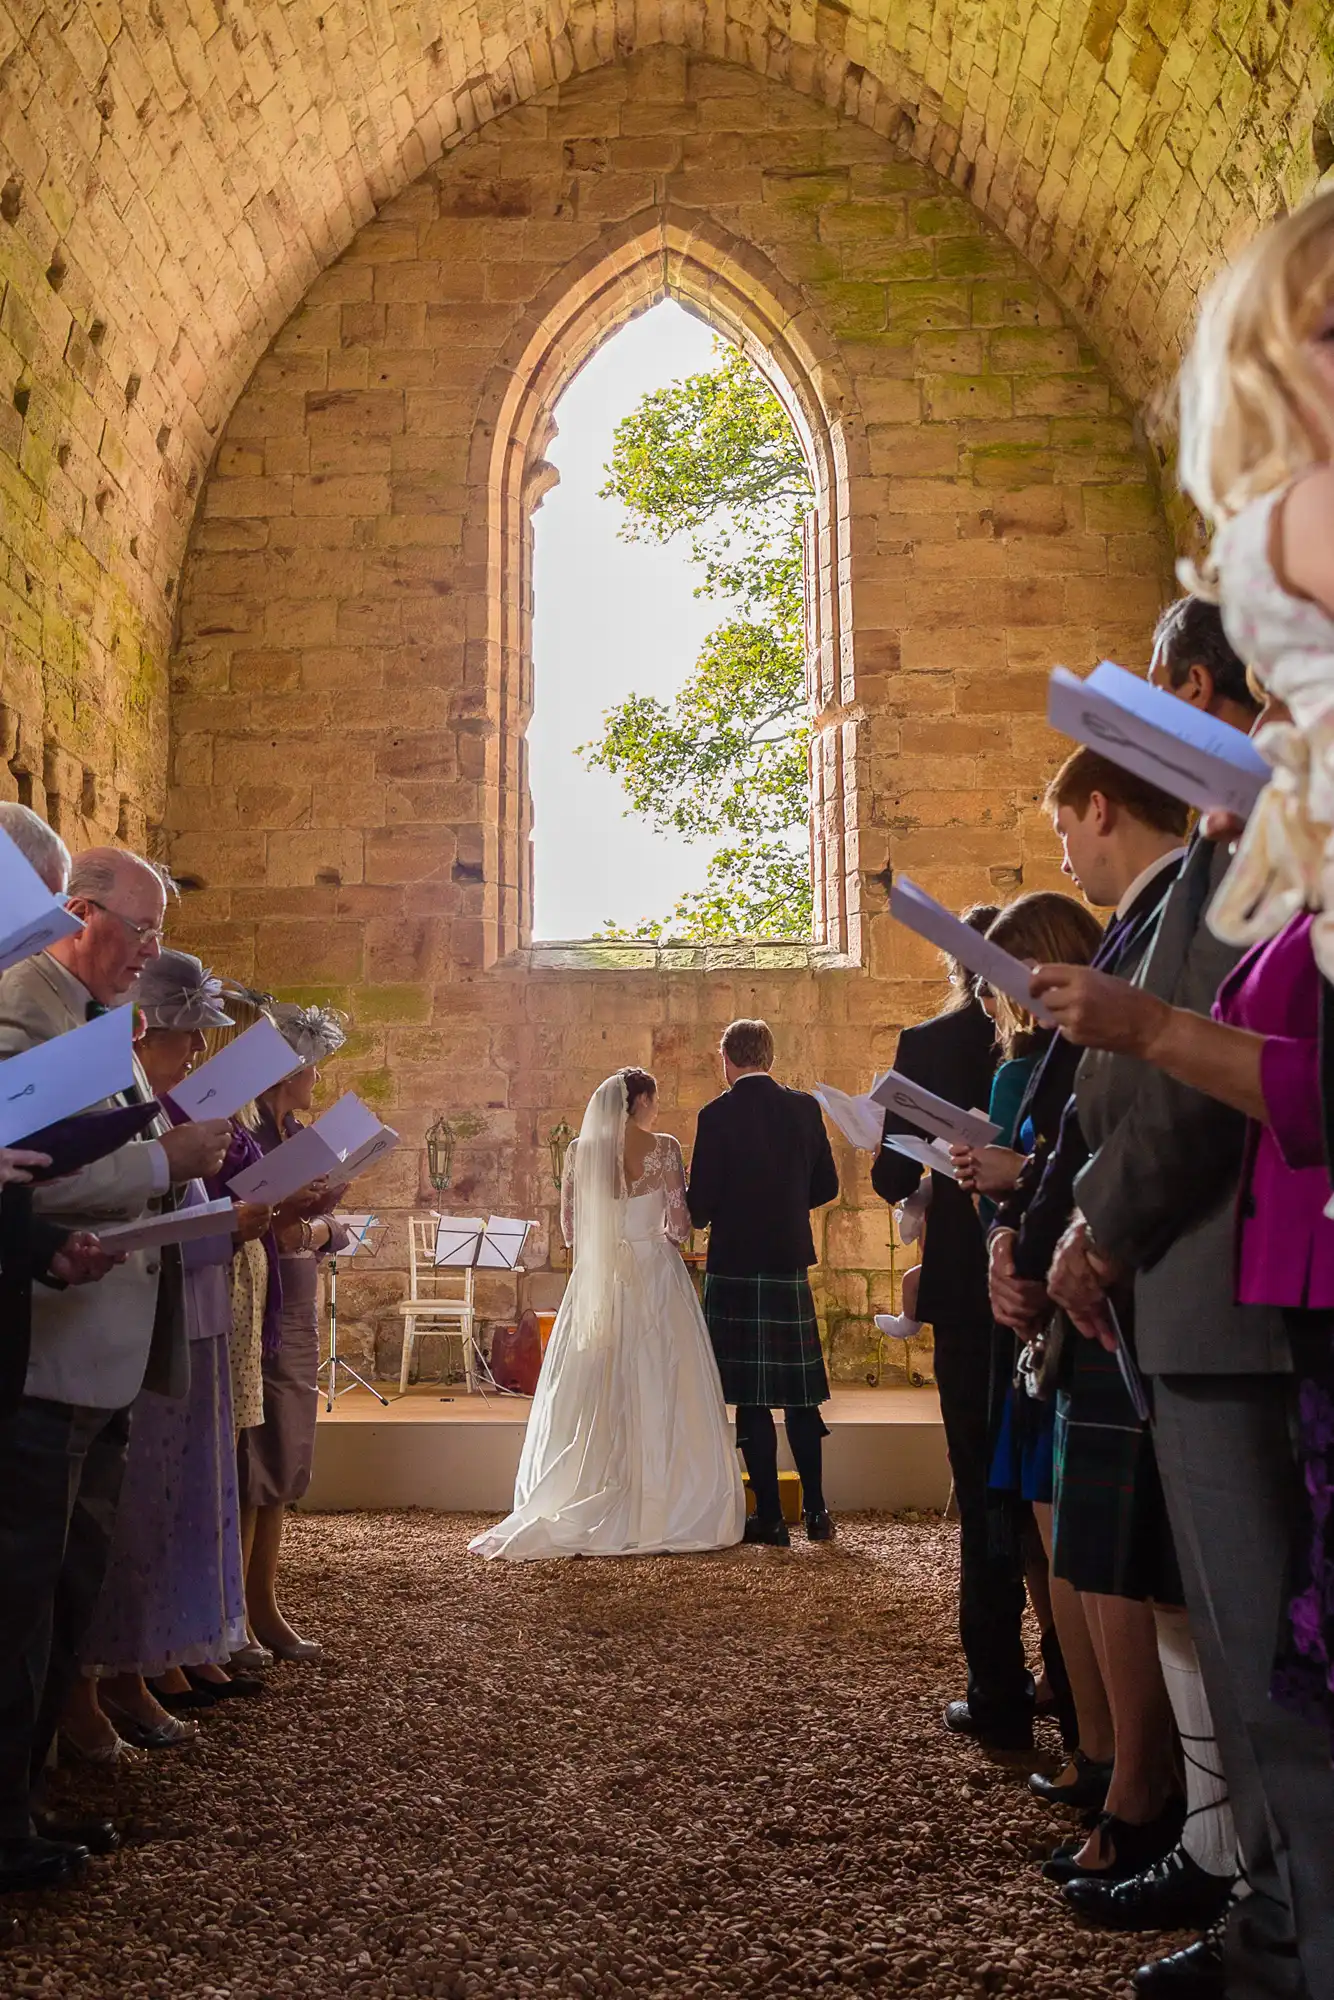 A bride and groom holding hands during a wedding ceremony inside a historic church with a large arched window.